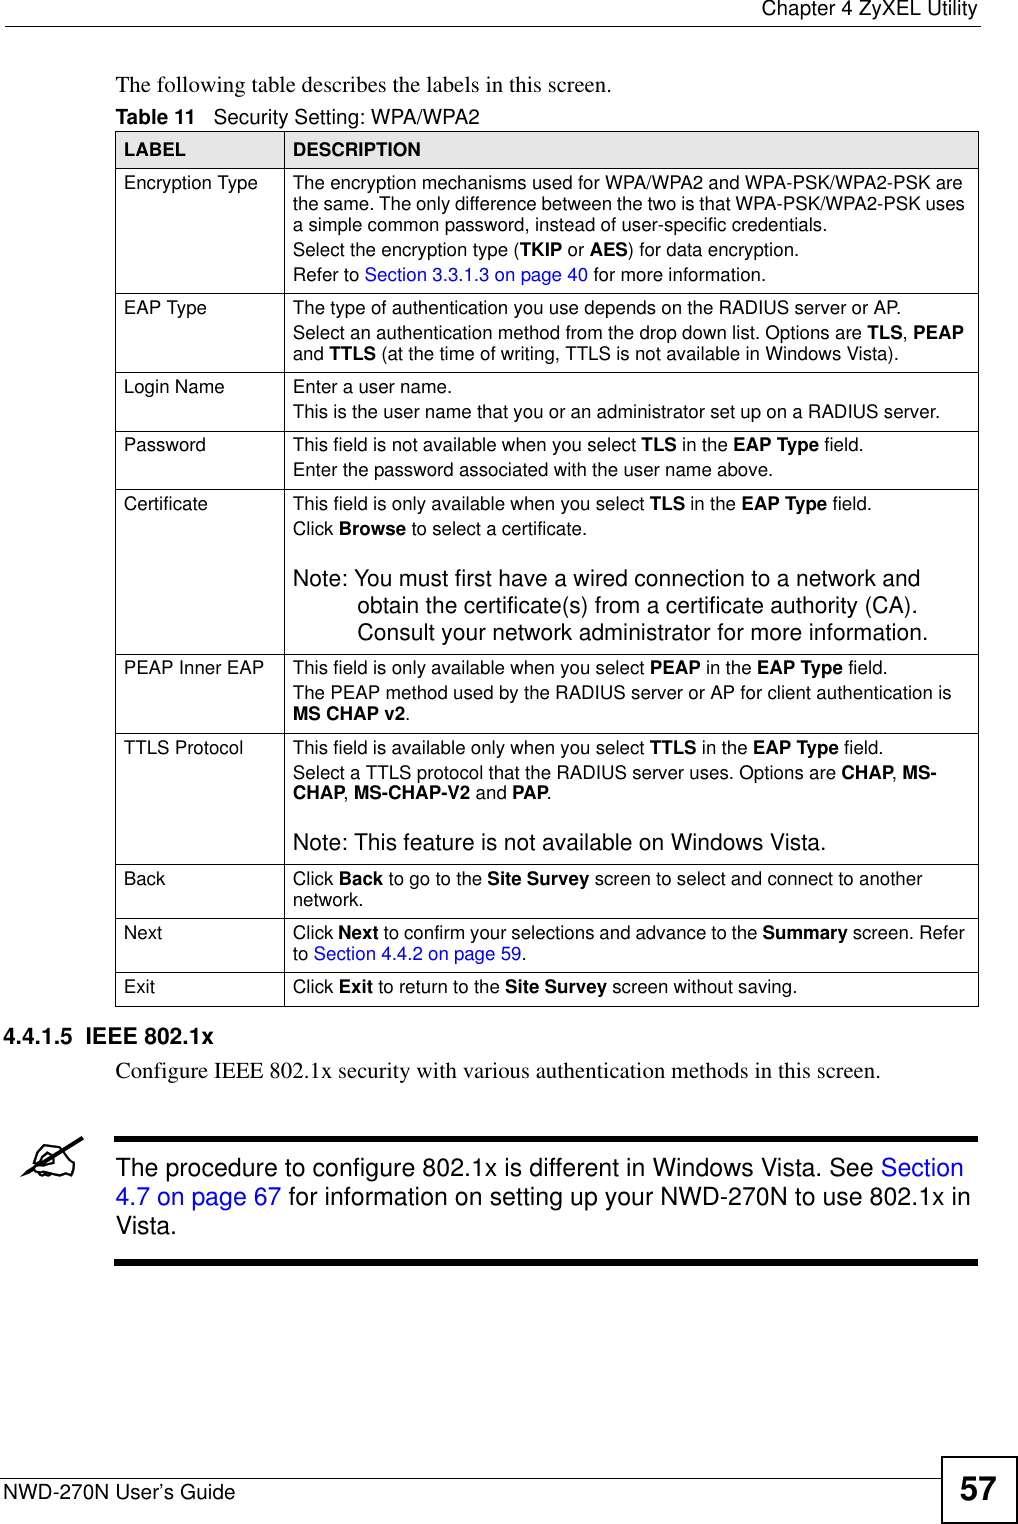  Chapter 4 ZyXEL UtilityNWD-270N User’s Guide 57The following table describes the labels in this screen. 4.4.1.5  IEEE 802.1xConfigure IEEE 802.1x security with various authentication methods in this screen. &quot;The procedure to configure 802.1x is different in Windows Vista. See Section 4.7 on page 67 for information on setting up your NWD-270N to use 802.1x in Vista.Table 11   Security Setting: WPA/WPA2LABEL DESCRIPTIONEncryption Type The encryption mechanisms used for WPA/WPA2 and WPA-PSK/WPA2-PSK are the same. The only difference between the two is that WPA-PSK/WPA2-PSK uses a simple common password, instead of user-specific credentials.Select the encryption type (TKIP or AES) for data encryption.Refer to Section 3.3.1.3 on page 40 for more information.EAP Type The type of authentication you use depends on the RADIUS server or AP.Select an authentication method from the drop down list. Options are TLS, PEAP and TTLS (at the time of writing, TTLS is not available in Windows Vista).Login Name Enter a user name. This is the user name that you or an administrator set up on a RADIUS server.Password This field is not available when you select TLS in the EAP Type field. Enter the password associated with the user name above. Certificate This field is only available when you select TLS in the EAP Type field. Click Browse to select a certificate.Note: You must first have a wired connection to a network and obtain the certificate(s) from a certificate authority (CA). Consult your network administrator for more information.PEAP Inner EAP This field is only available when you select PEAP in the EAP Type field.The PEAP method used by the RADIUS server or AP for client authentication is MS CHAP v2.TTLS Protocol This field is available only when you select TTLS in the EAP Type field. Select a TTLS protocol that the RADIUS server uses. Options are CHAP, MS-CHAP, MS-CHAP-V2 and PAP.Note: This feature is not available on Windows Vista.Back Click Back to go to the Site Survey screen to select and connect to another network.Next Click Next to confirm your selections and advance to the Summary screen. Refer to Section 4.4.2 on page 59.Exit Click Exit to return to the Site Survey screen without saving.